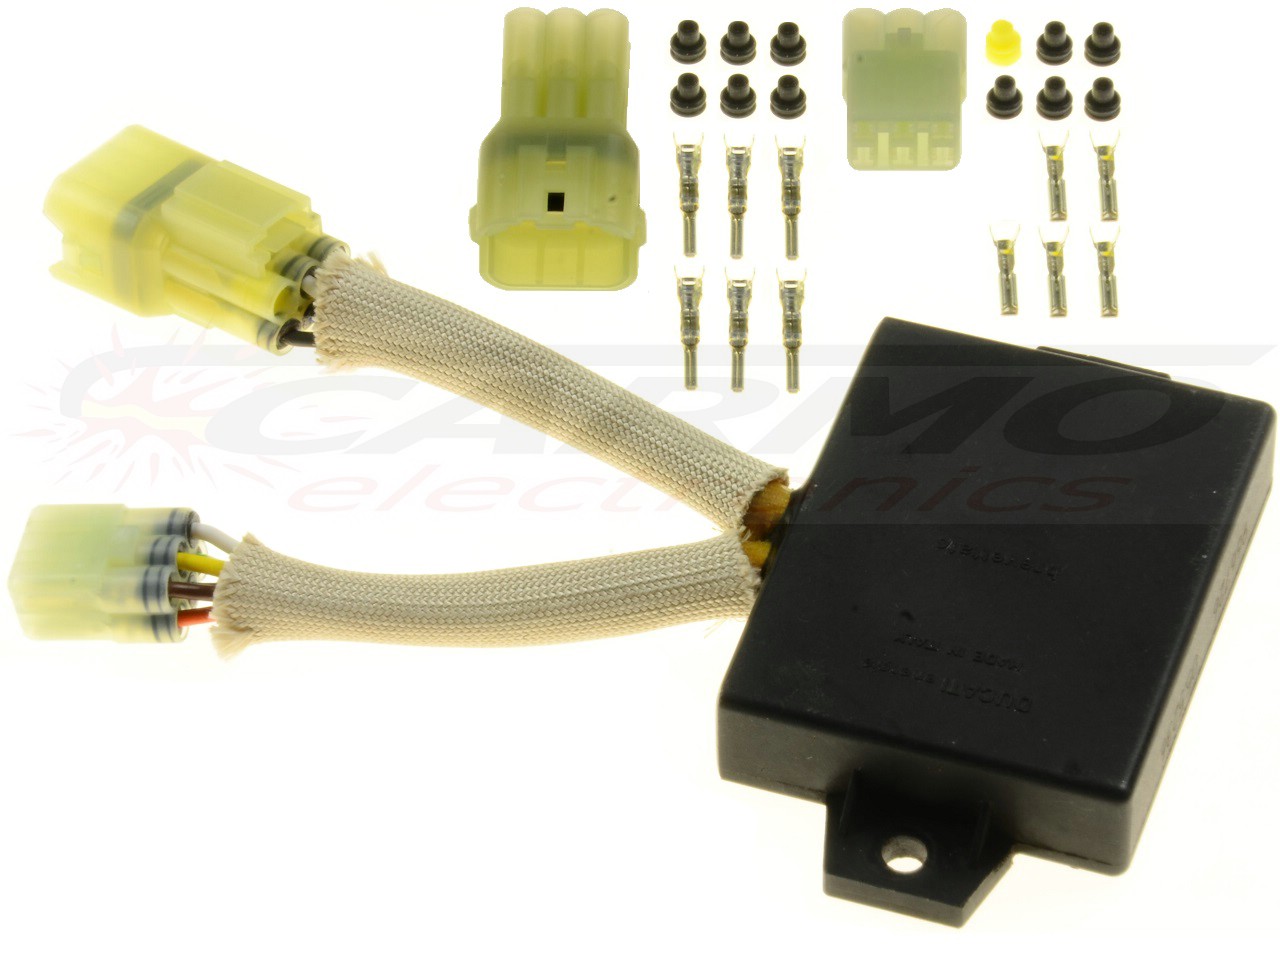 Rotax 912 966726 new wires, sleeves and connectors - Clique na Imagem para Fechar